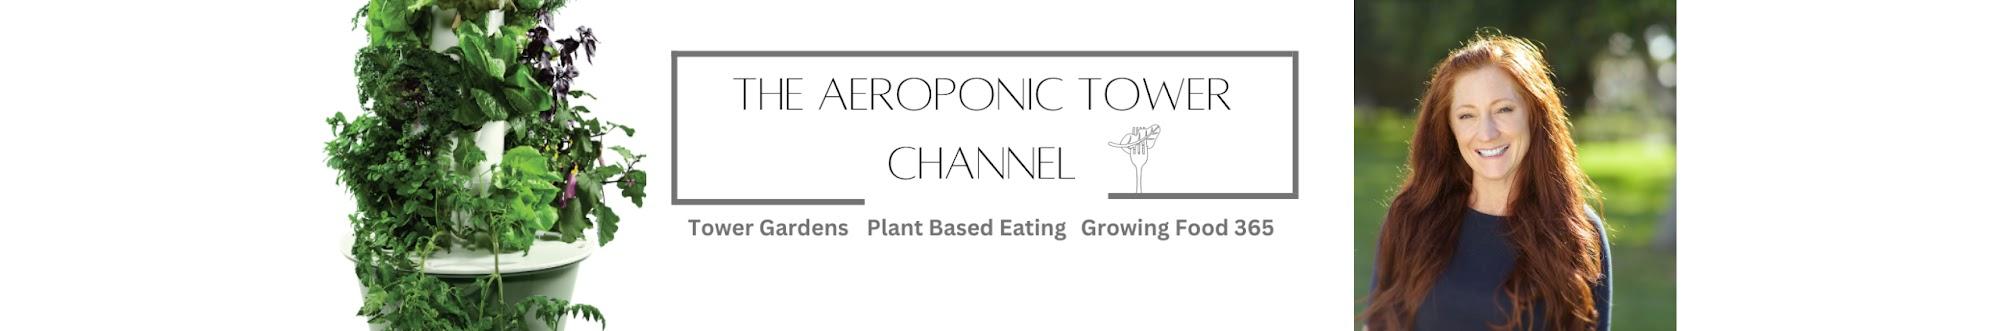 The Aeroponic Tower Channel